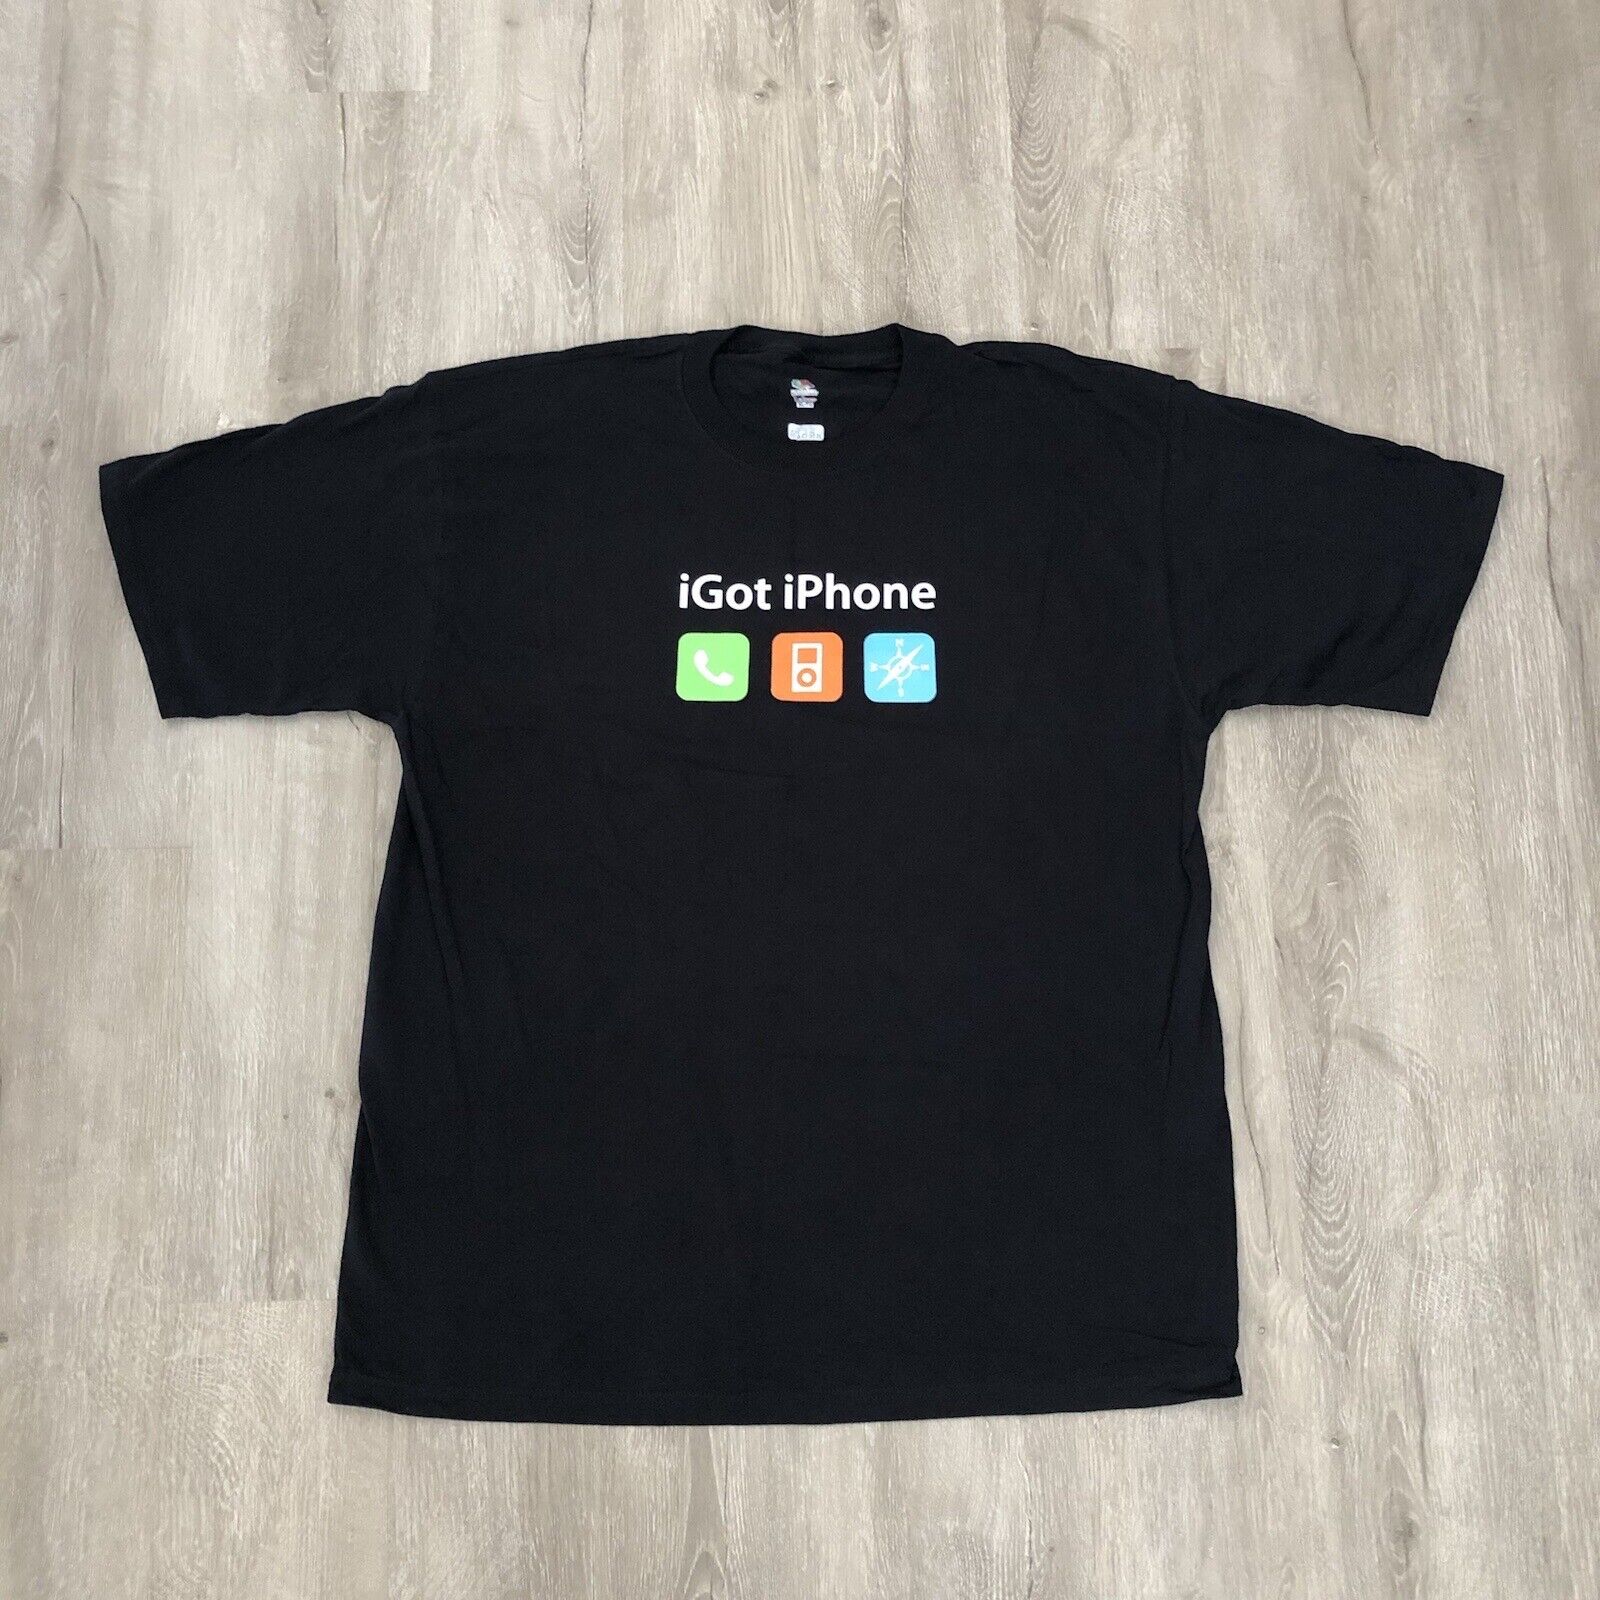 Vtg Apple iGot iPhone Shirt Mens XL Promo Launch Day iWas There 6/29/07 FastMac